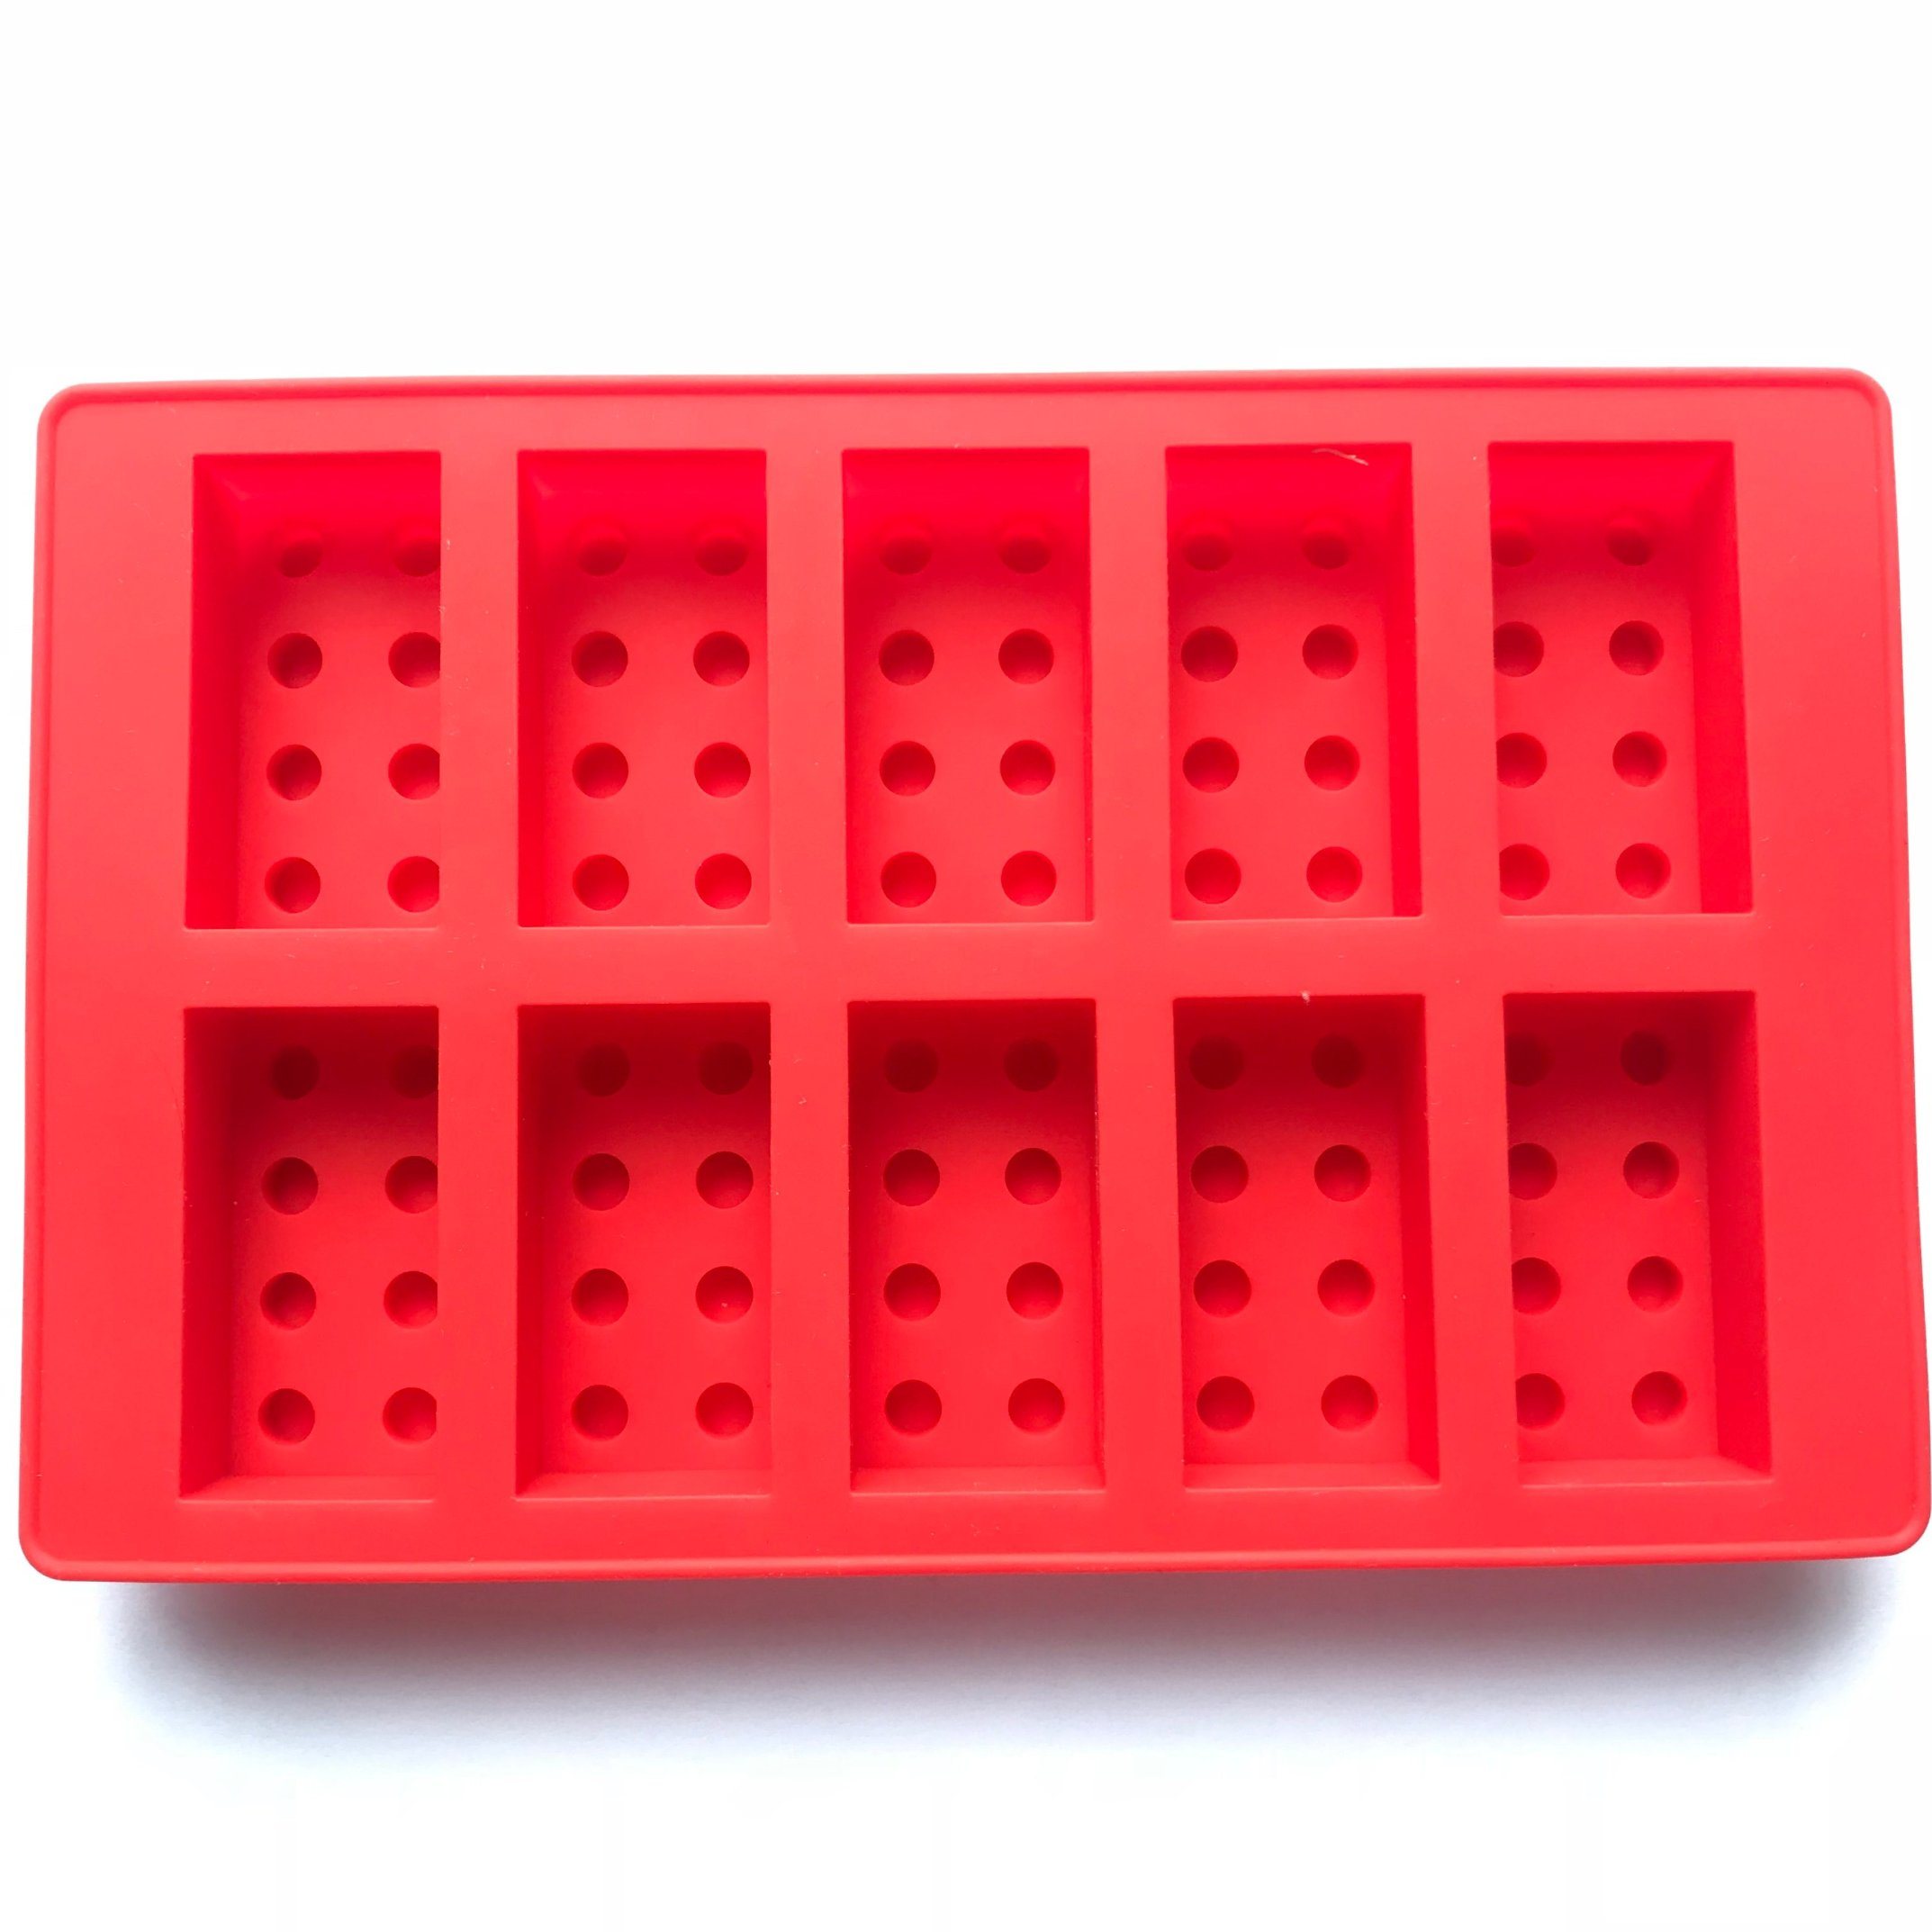 Ice Making Mould Lego Blocks Silicone Rubber Product